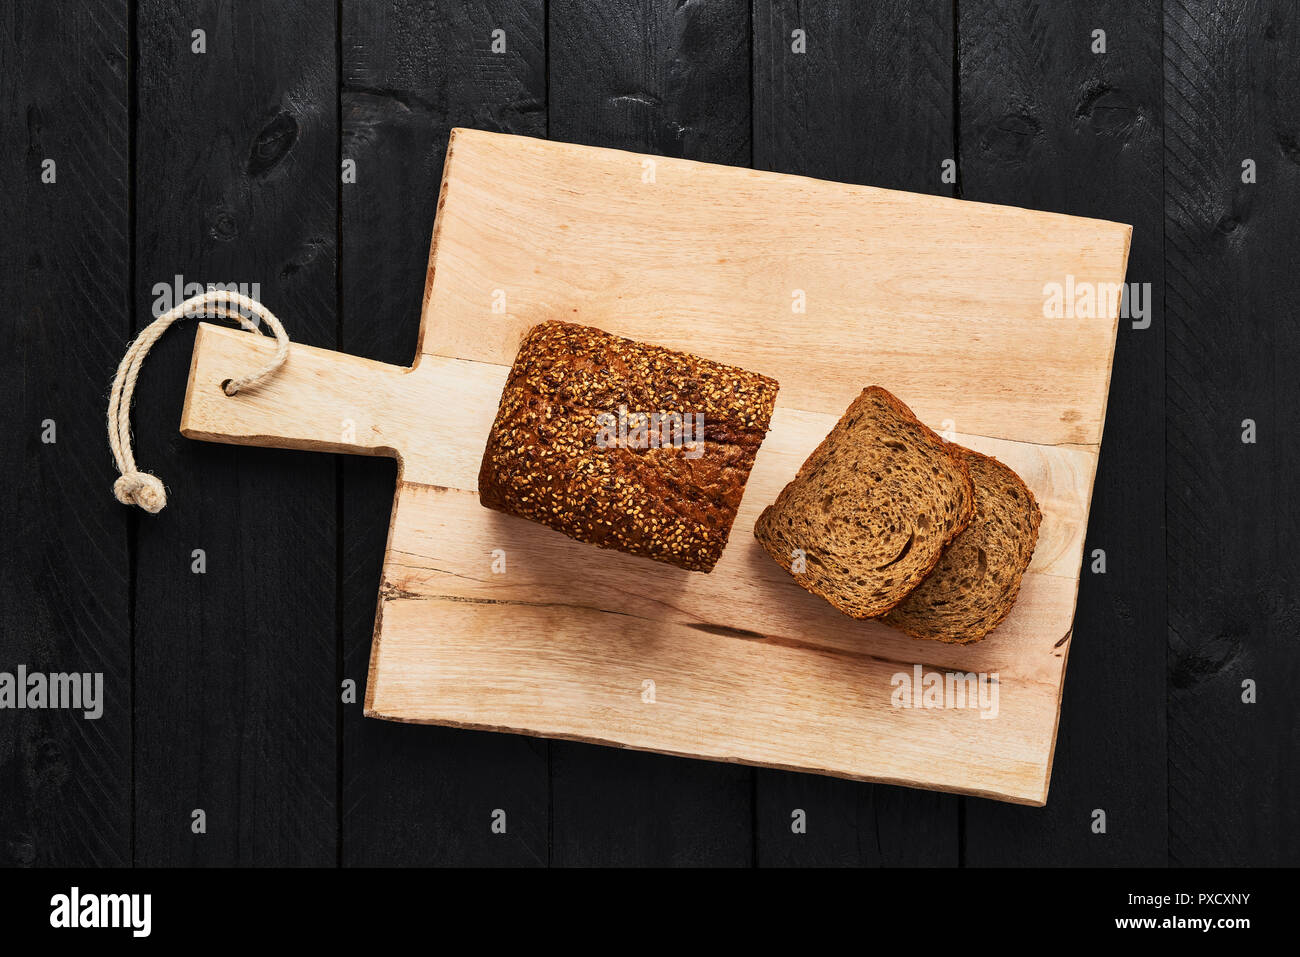 Loaf of sliced whole wheat bread on cutting board over black wooden table. Top view. Stock Photo